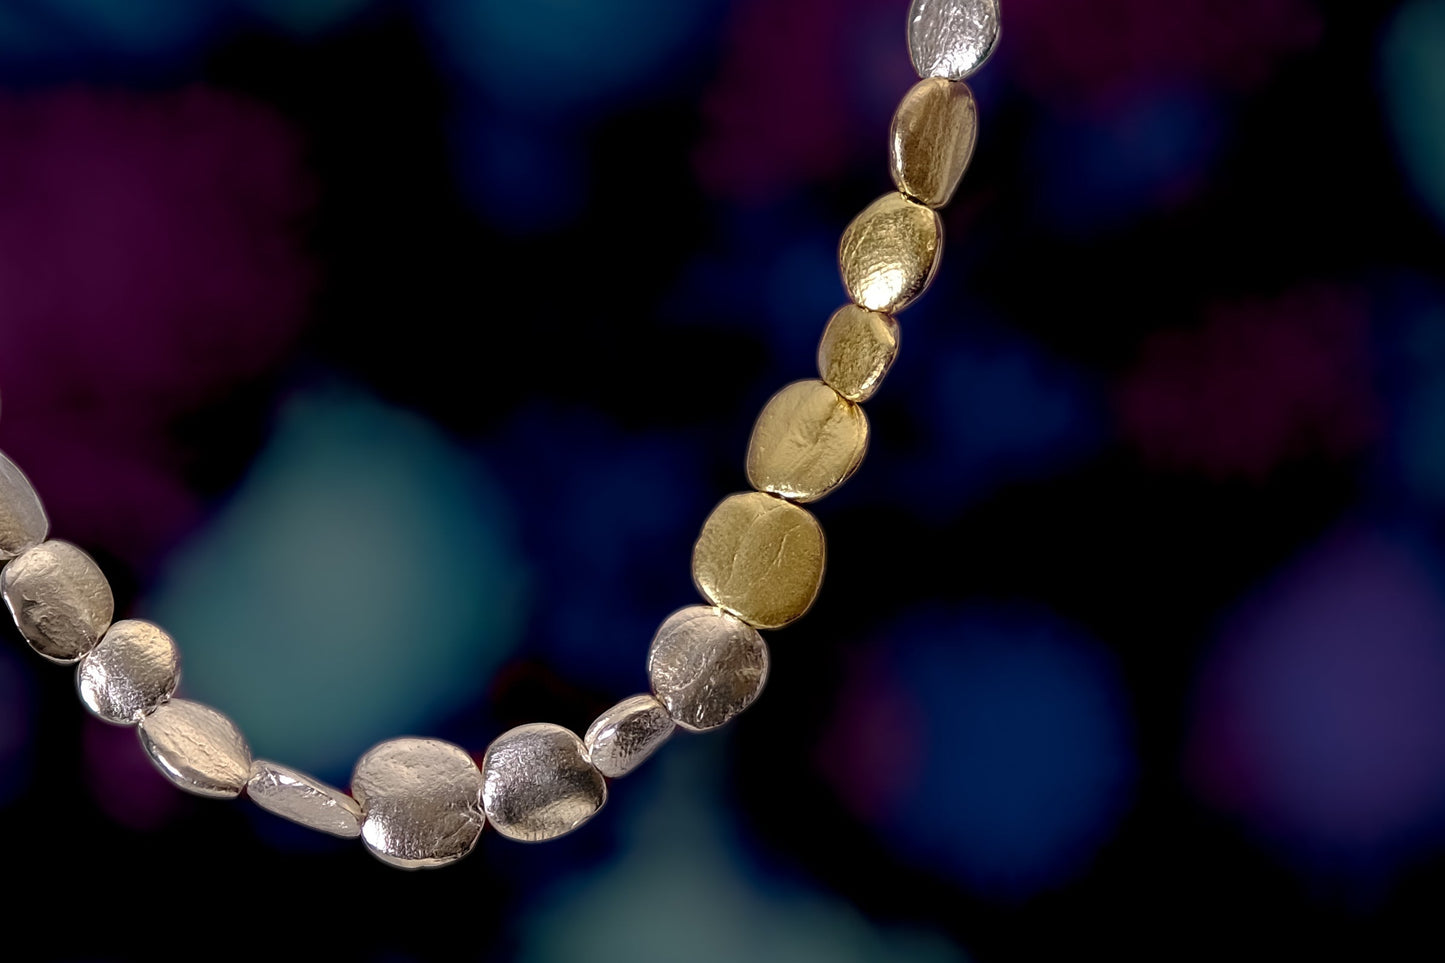 A photograph of part of a silver mystic bead bracelet with the addition of 5 18ct yellow gold beads.